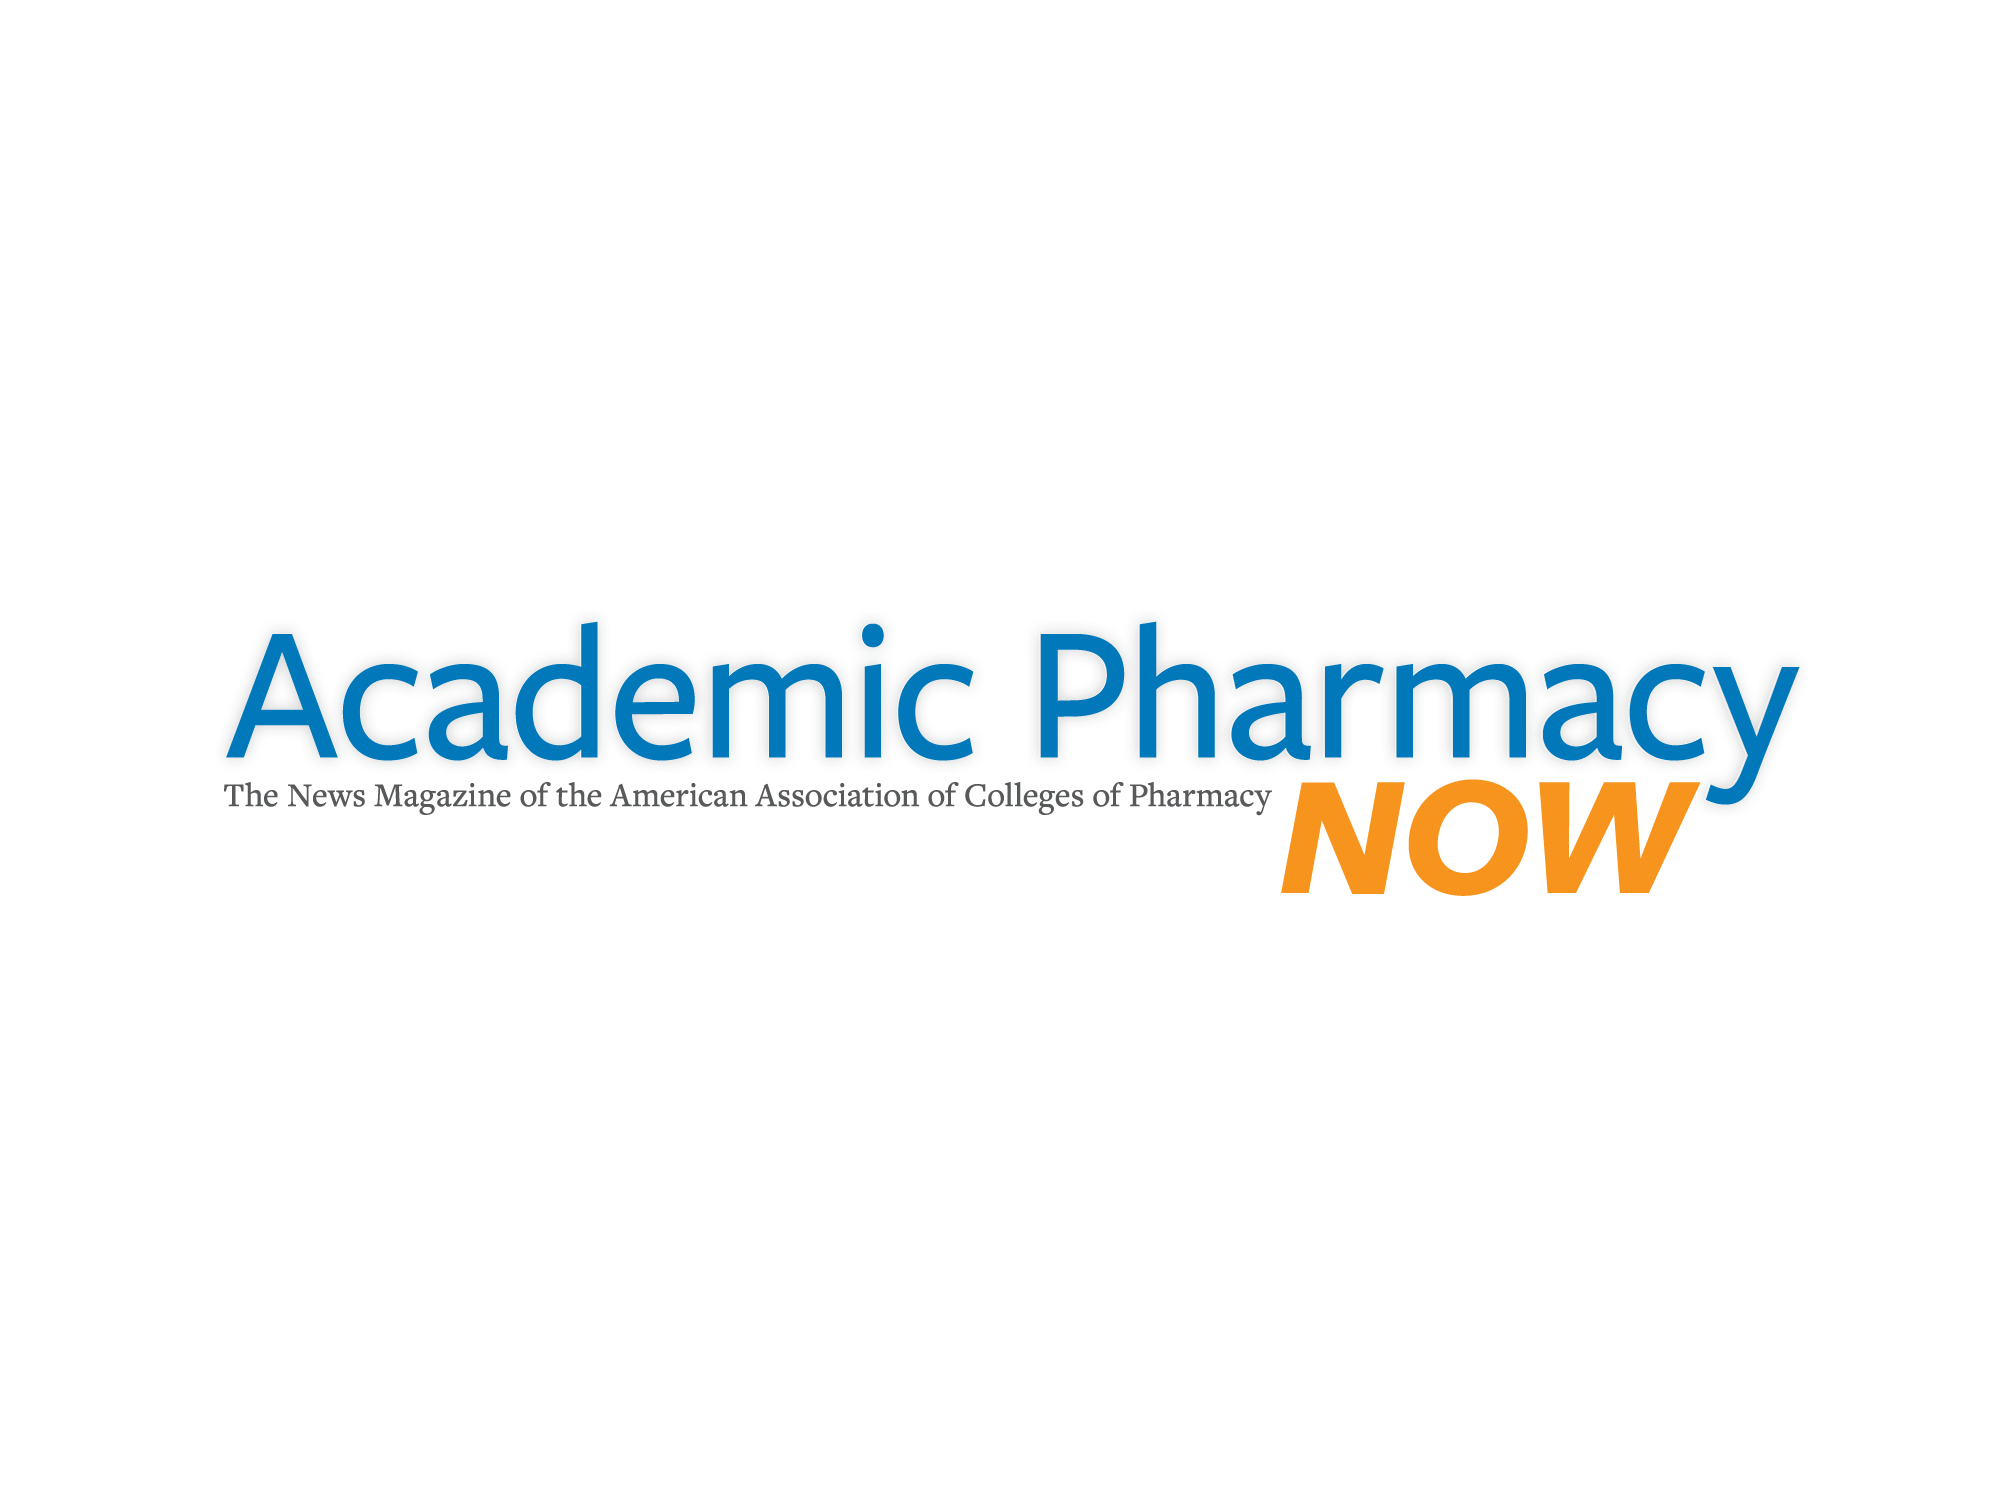 Academic Pharmacy Now logo - The news magazine of the American Association of Colleges of Pharmacy 